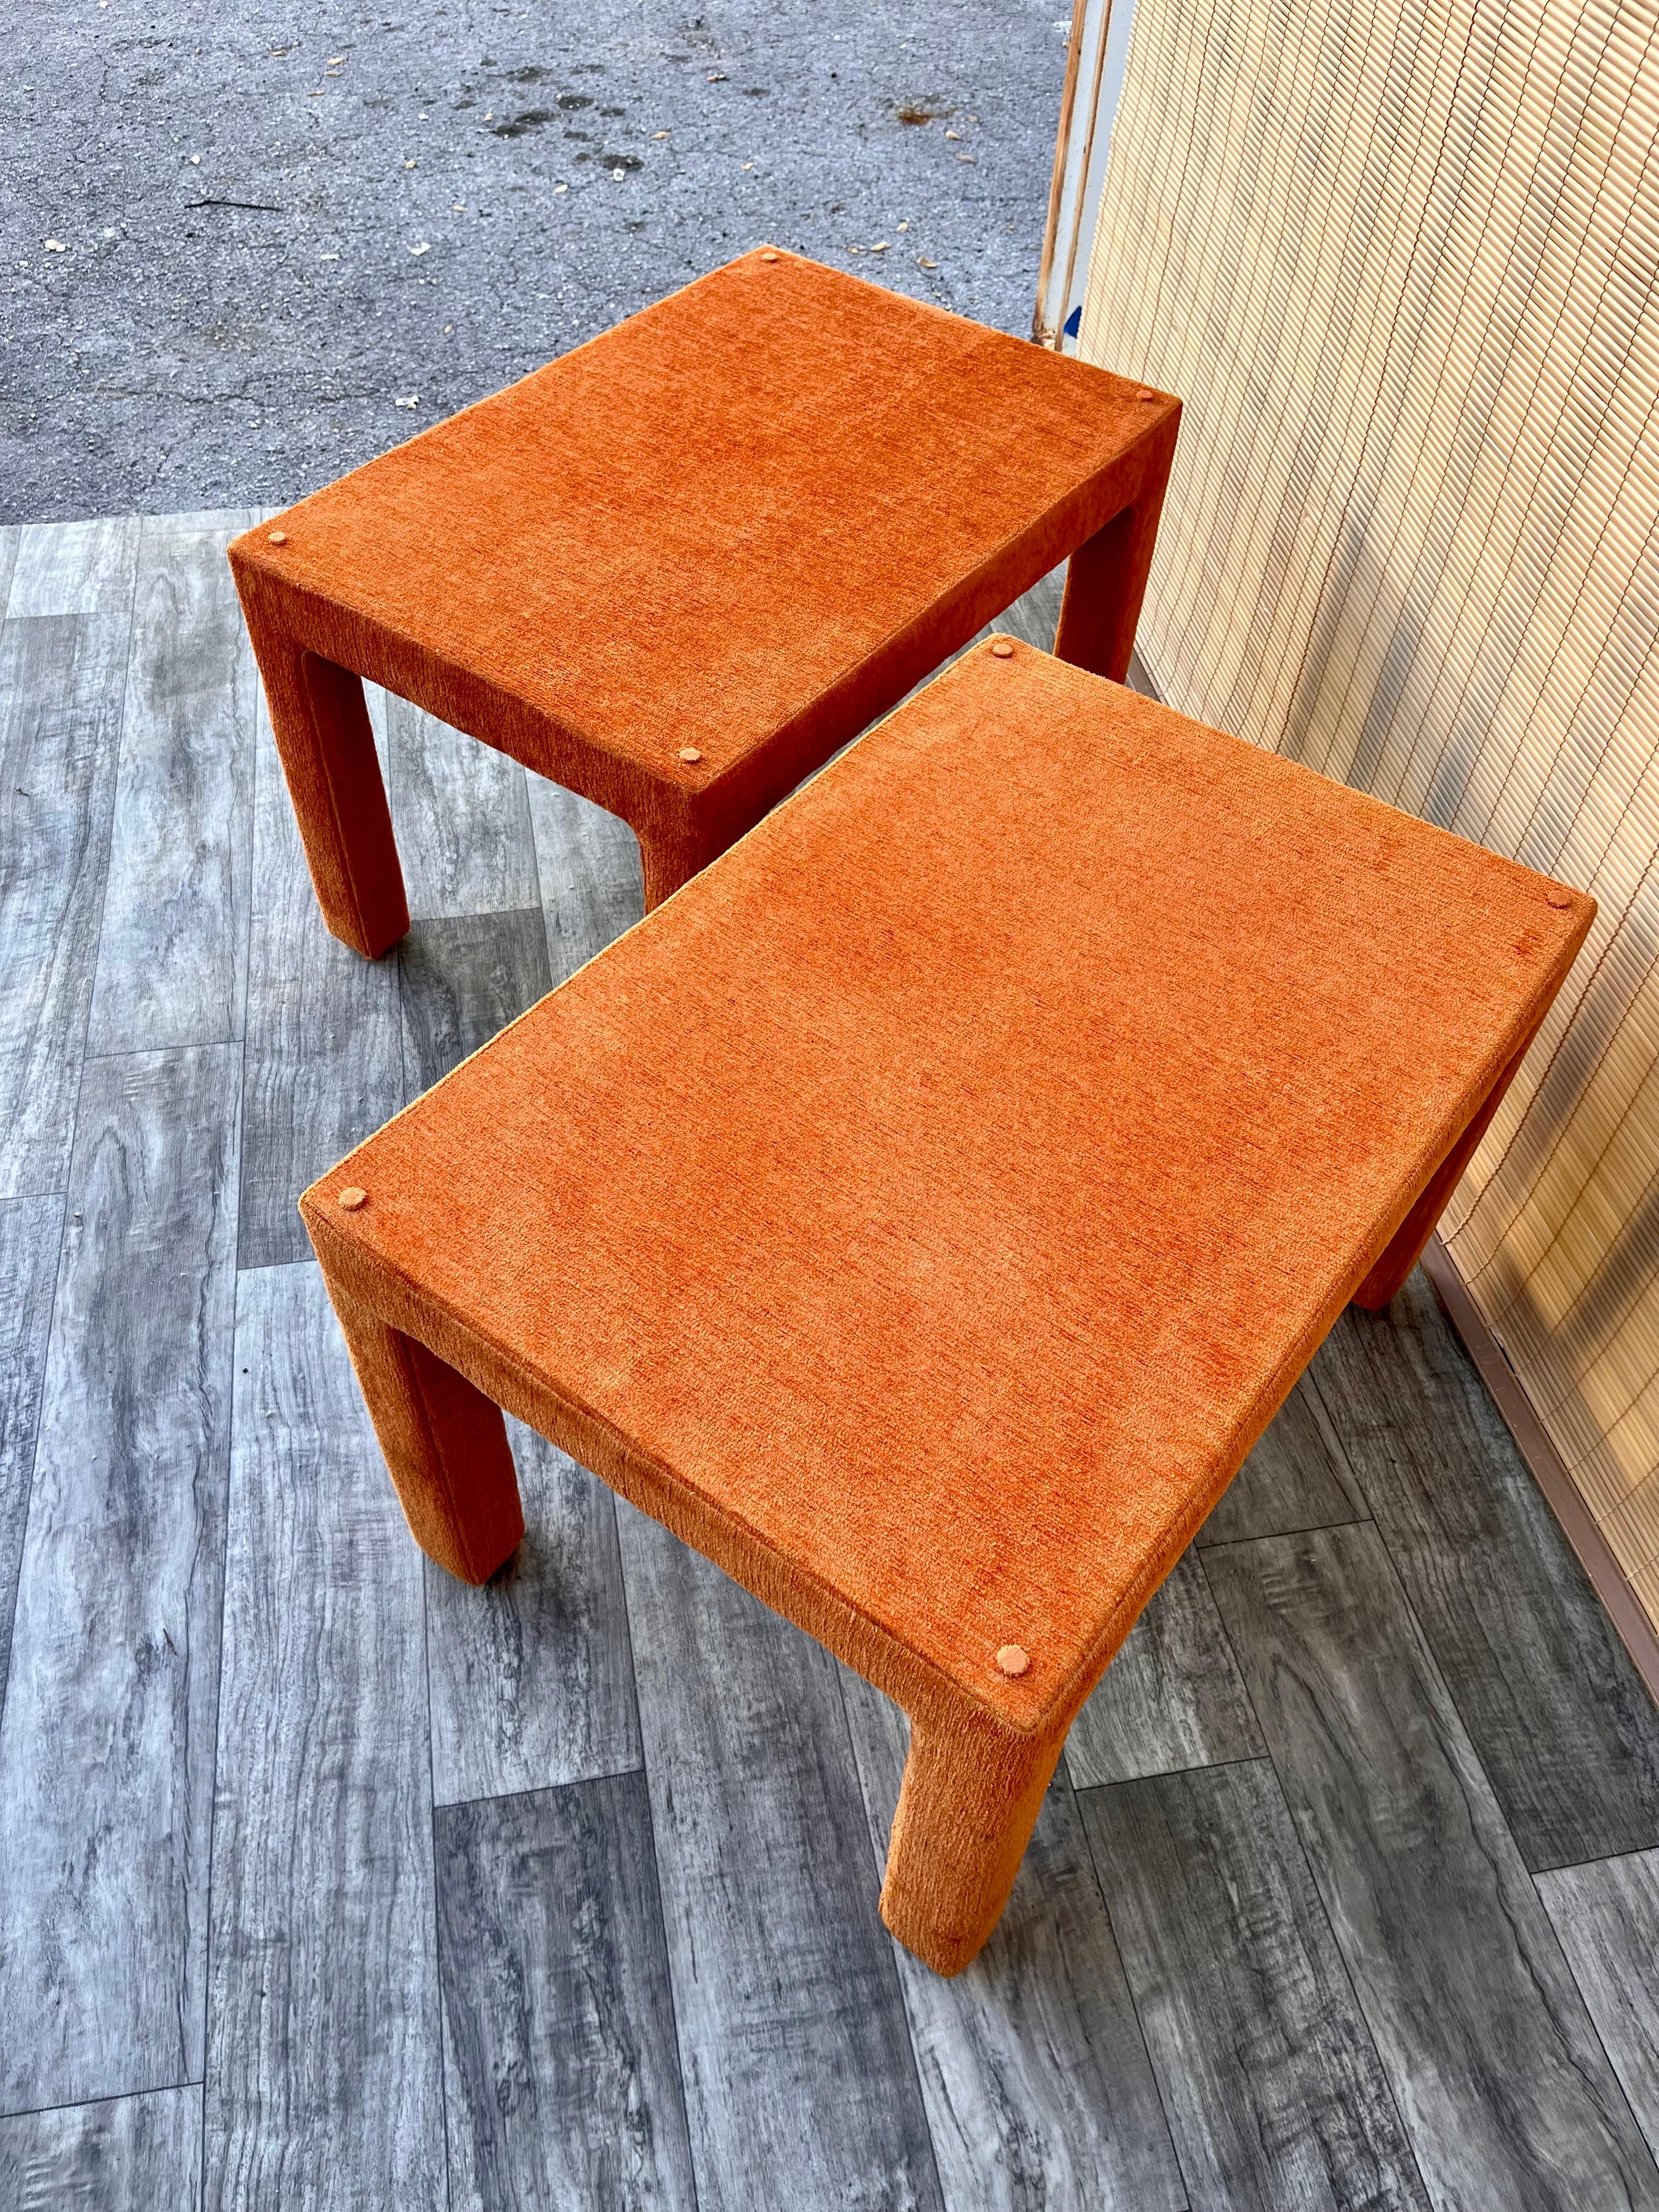 Pair of Mid-Century Modern Fully Upholstered Side Tables, circa 1970s For Sale 9